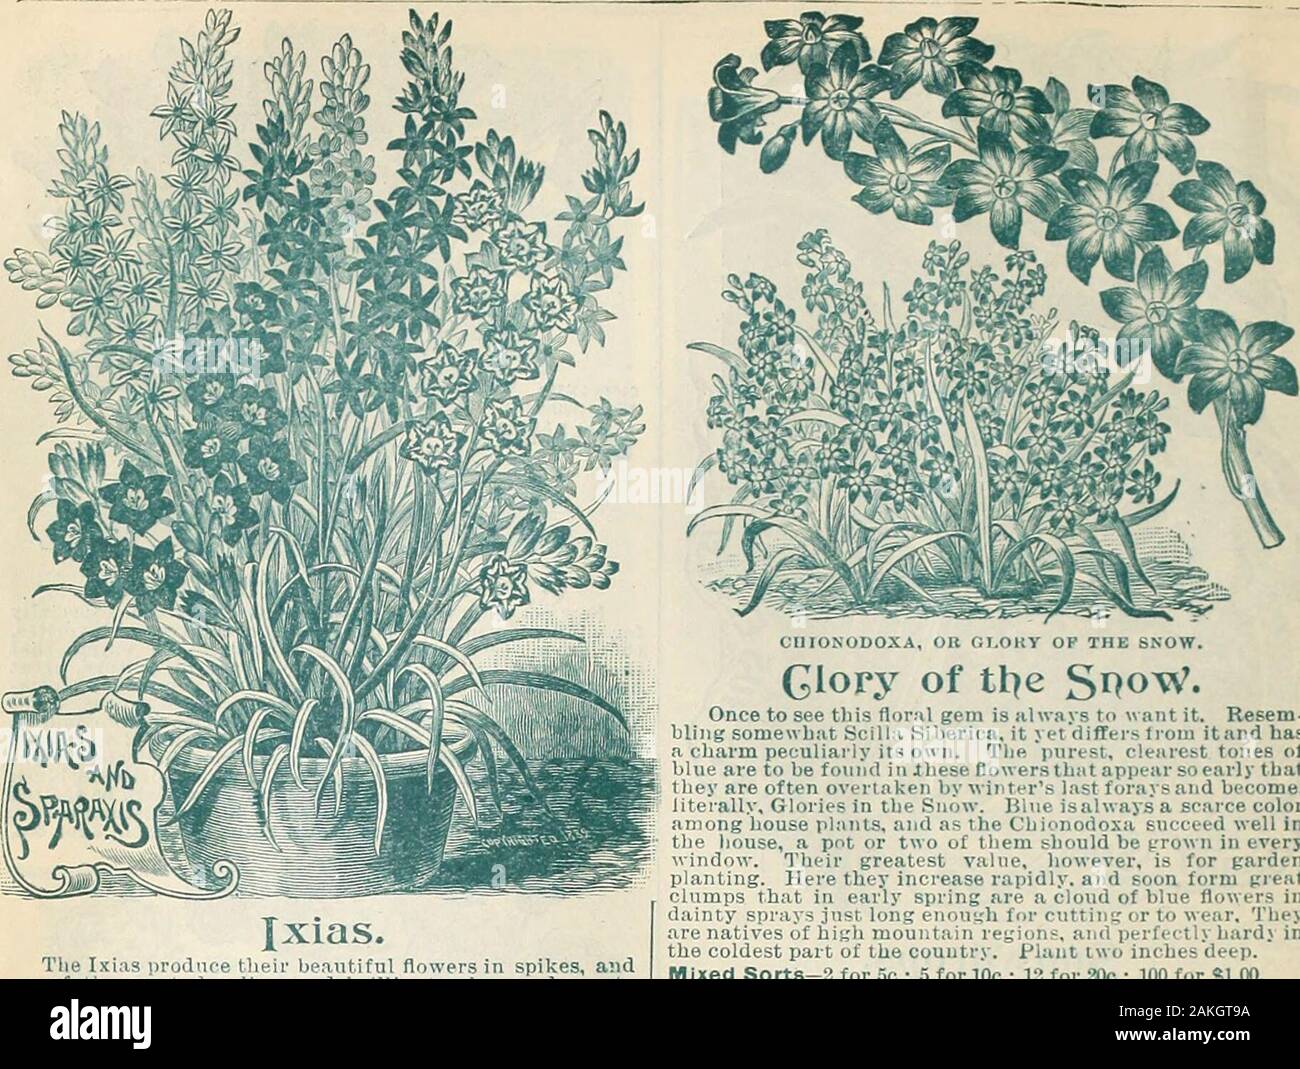 Childs' fall catalogue of bulbs and plants that bloom . wo inchesdeep, with the claws downward. They bear the most lovelyflowers imaginable —pink, white, black, yellow, red, blushand variegated, each about two inches in diameter, and asdouble and as perfectly imbricated as a Dahlia or Rose.After the foliage turns yellow the bulbs should be lifted andnot replaced until late in the fall, or they will spring up be-fore winter. Always choose, a sheltered location. For houseculture plant five or six bulbs in a 5-incb pot, and treat asHyacinths. They are charming winter-bloomers.Mont Blanc—Large and Stock Photo